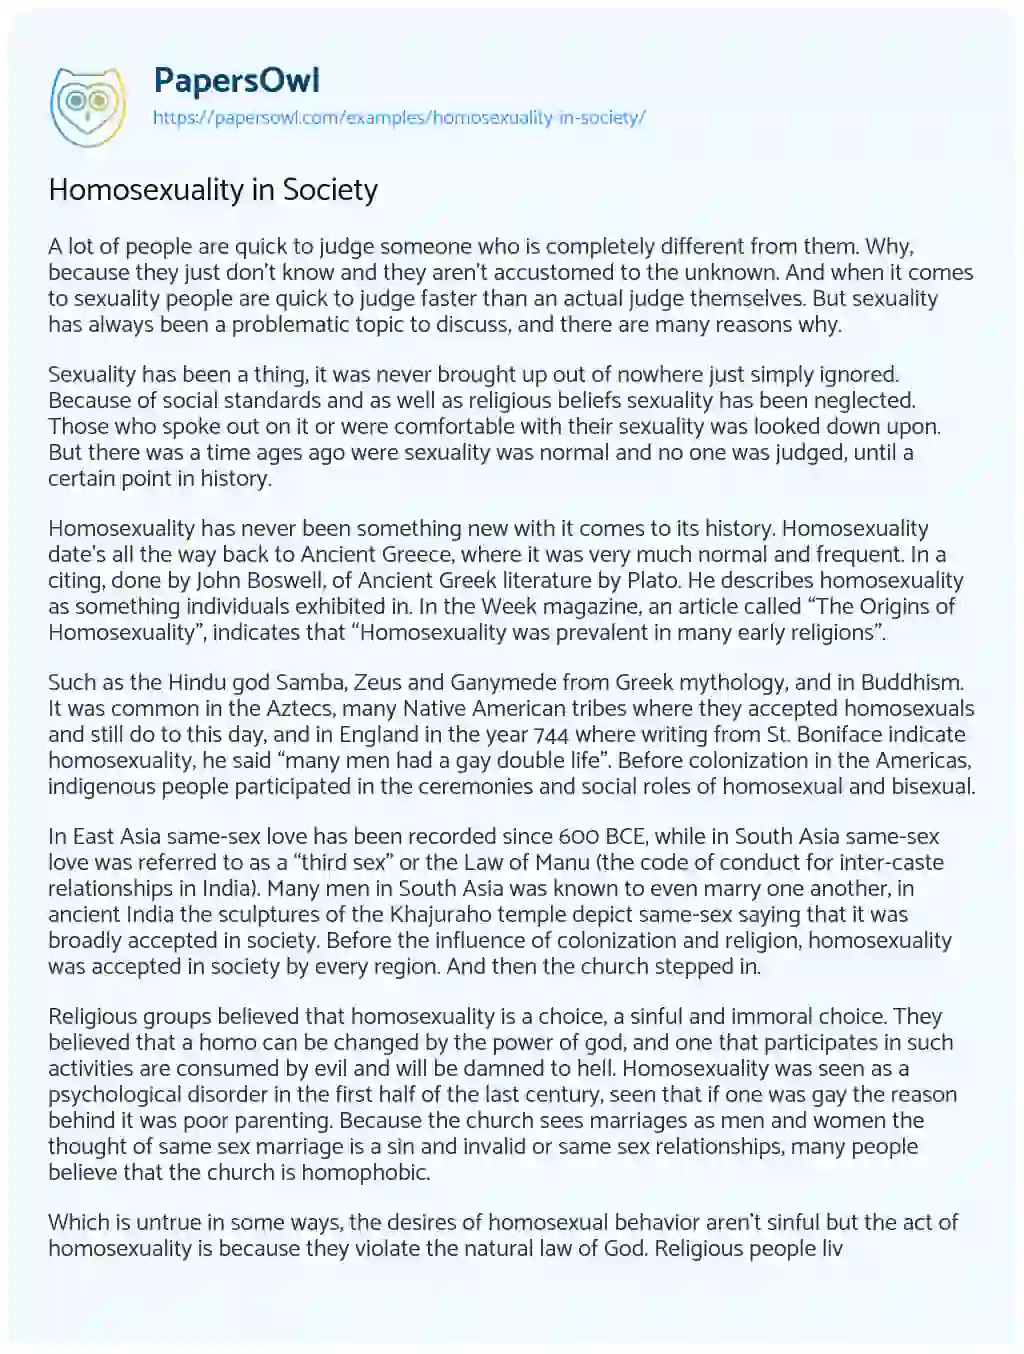 Homosexuality in Society essay